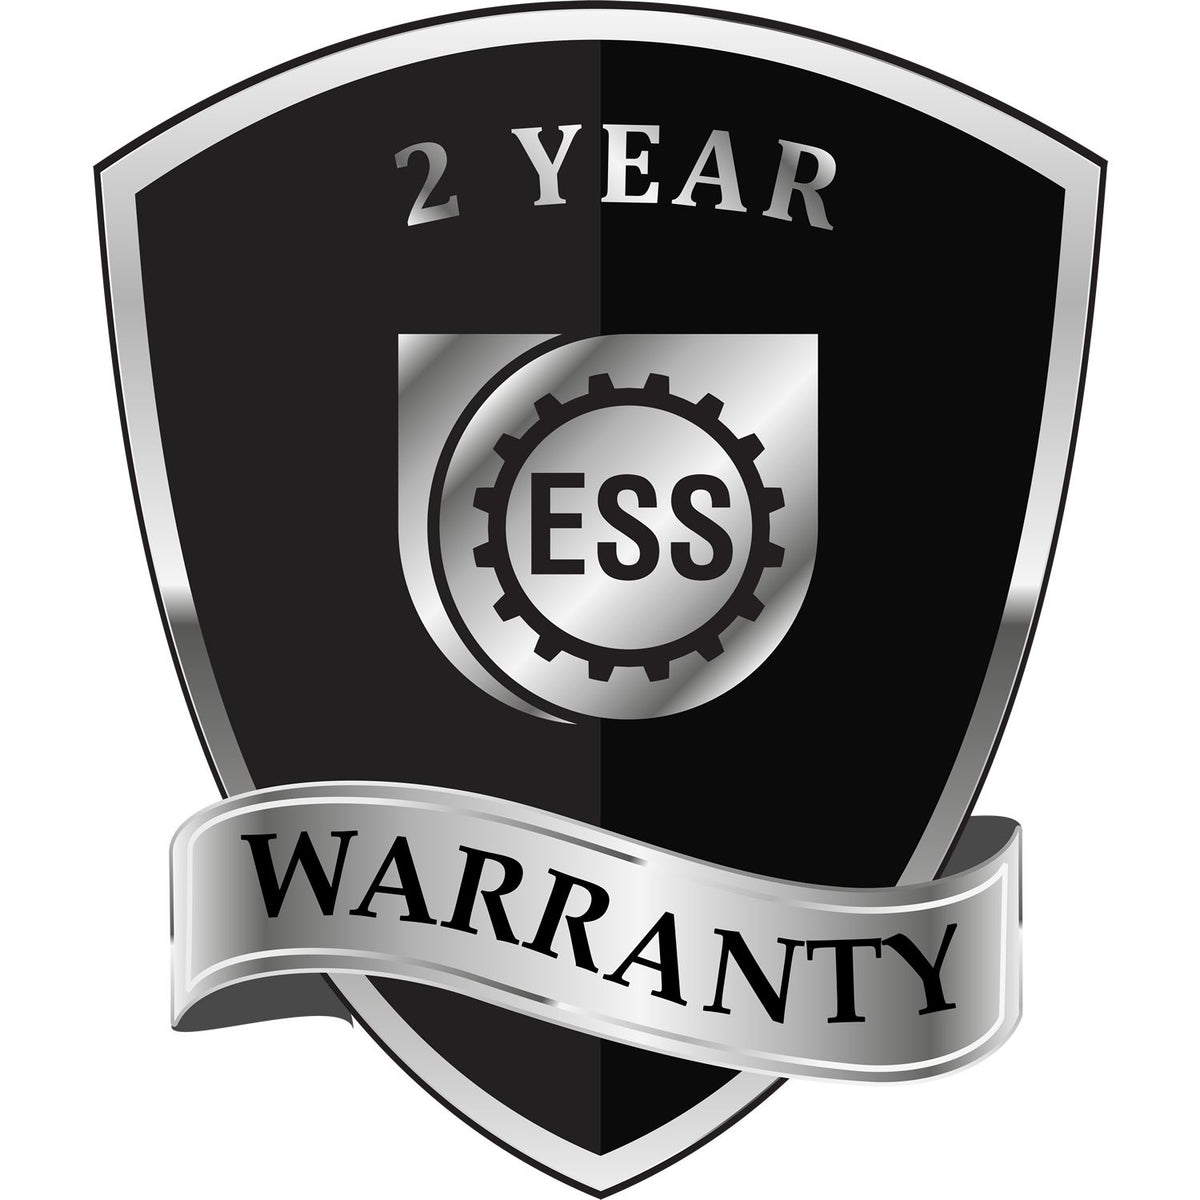 A badge or emblem showing a warranty icon for the Michigan Desk Architect Embossing Seal